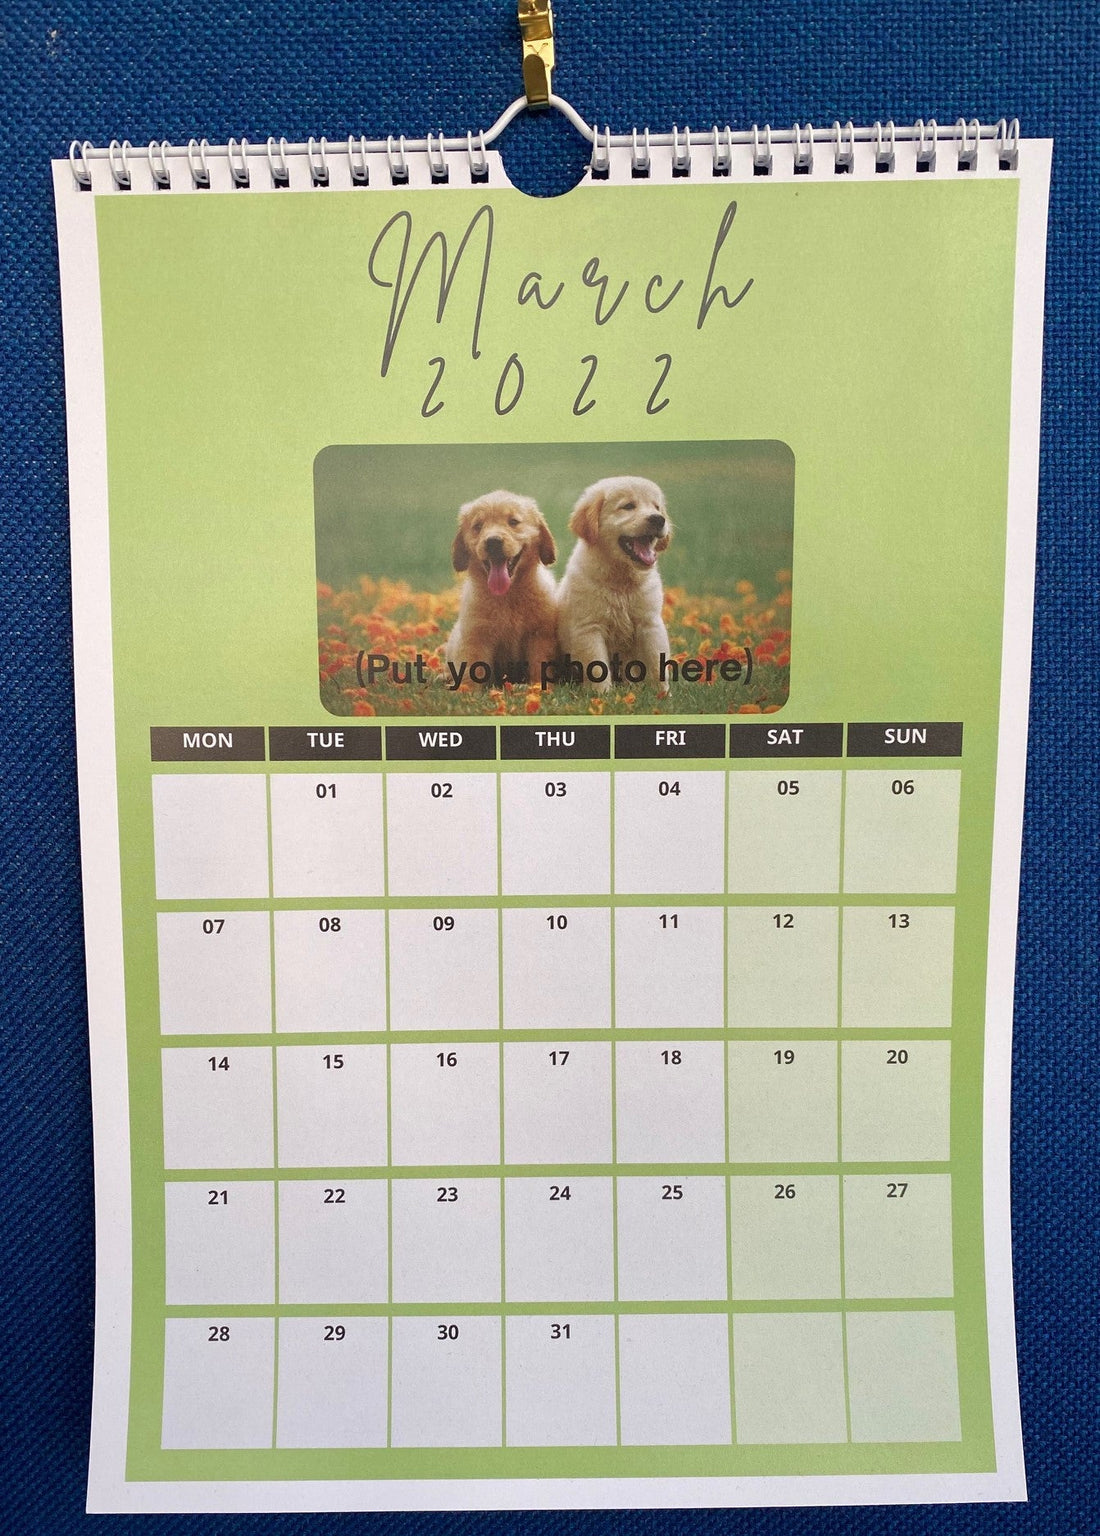 Personalised Calendars Printing Christchurch, New Zealand Frame